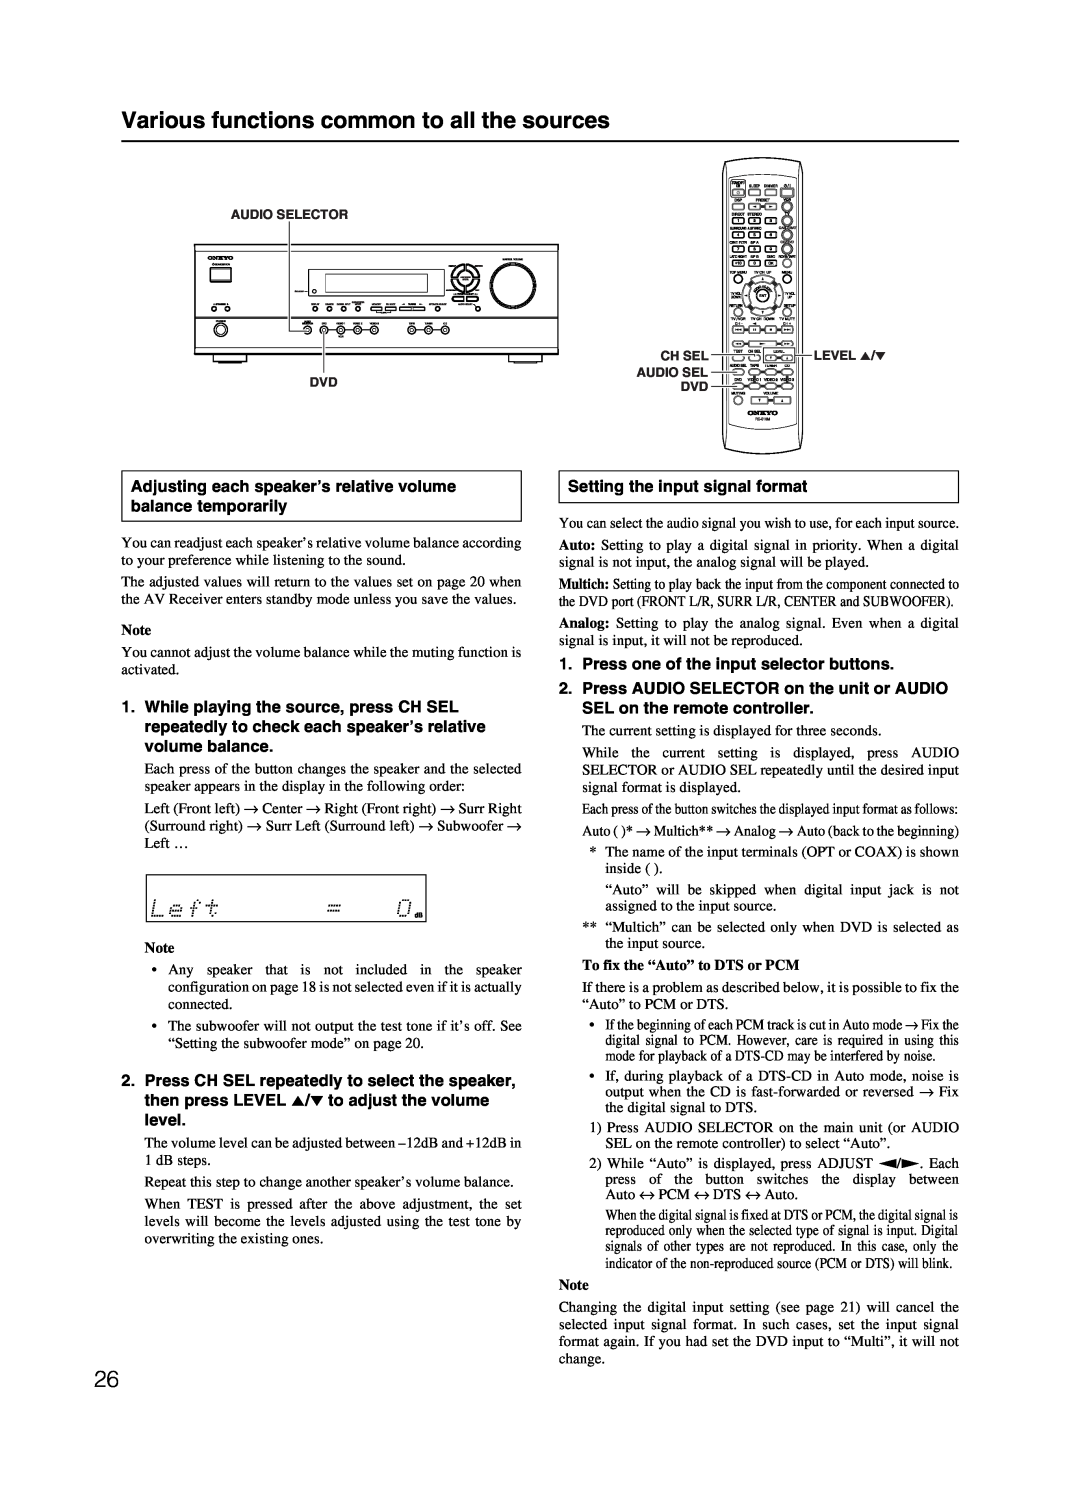 Onkyo HT-R410 appendix Various functions common to all the sources, Setting the input signal format 